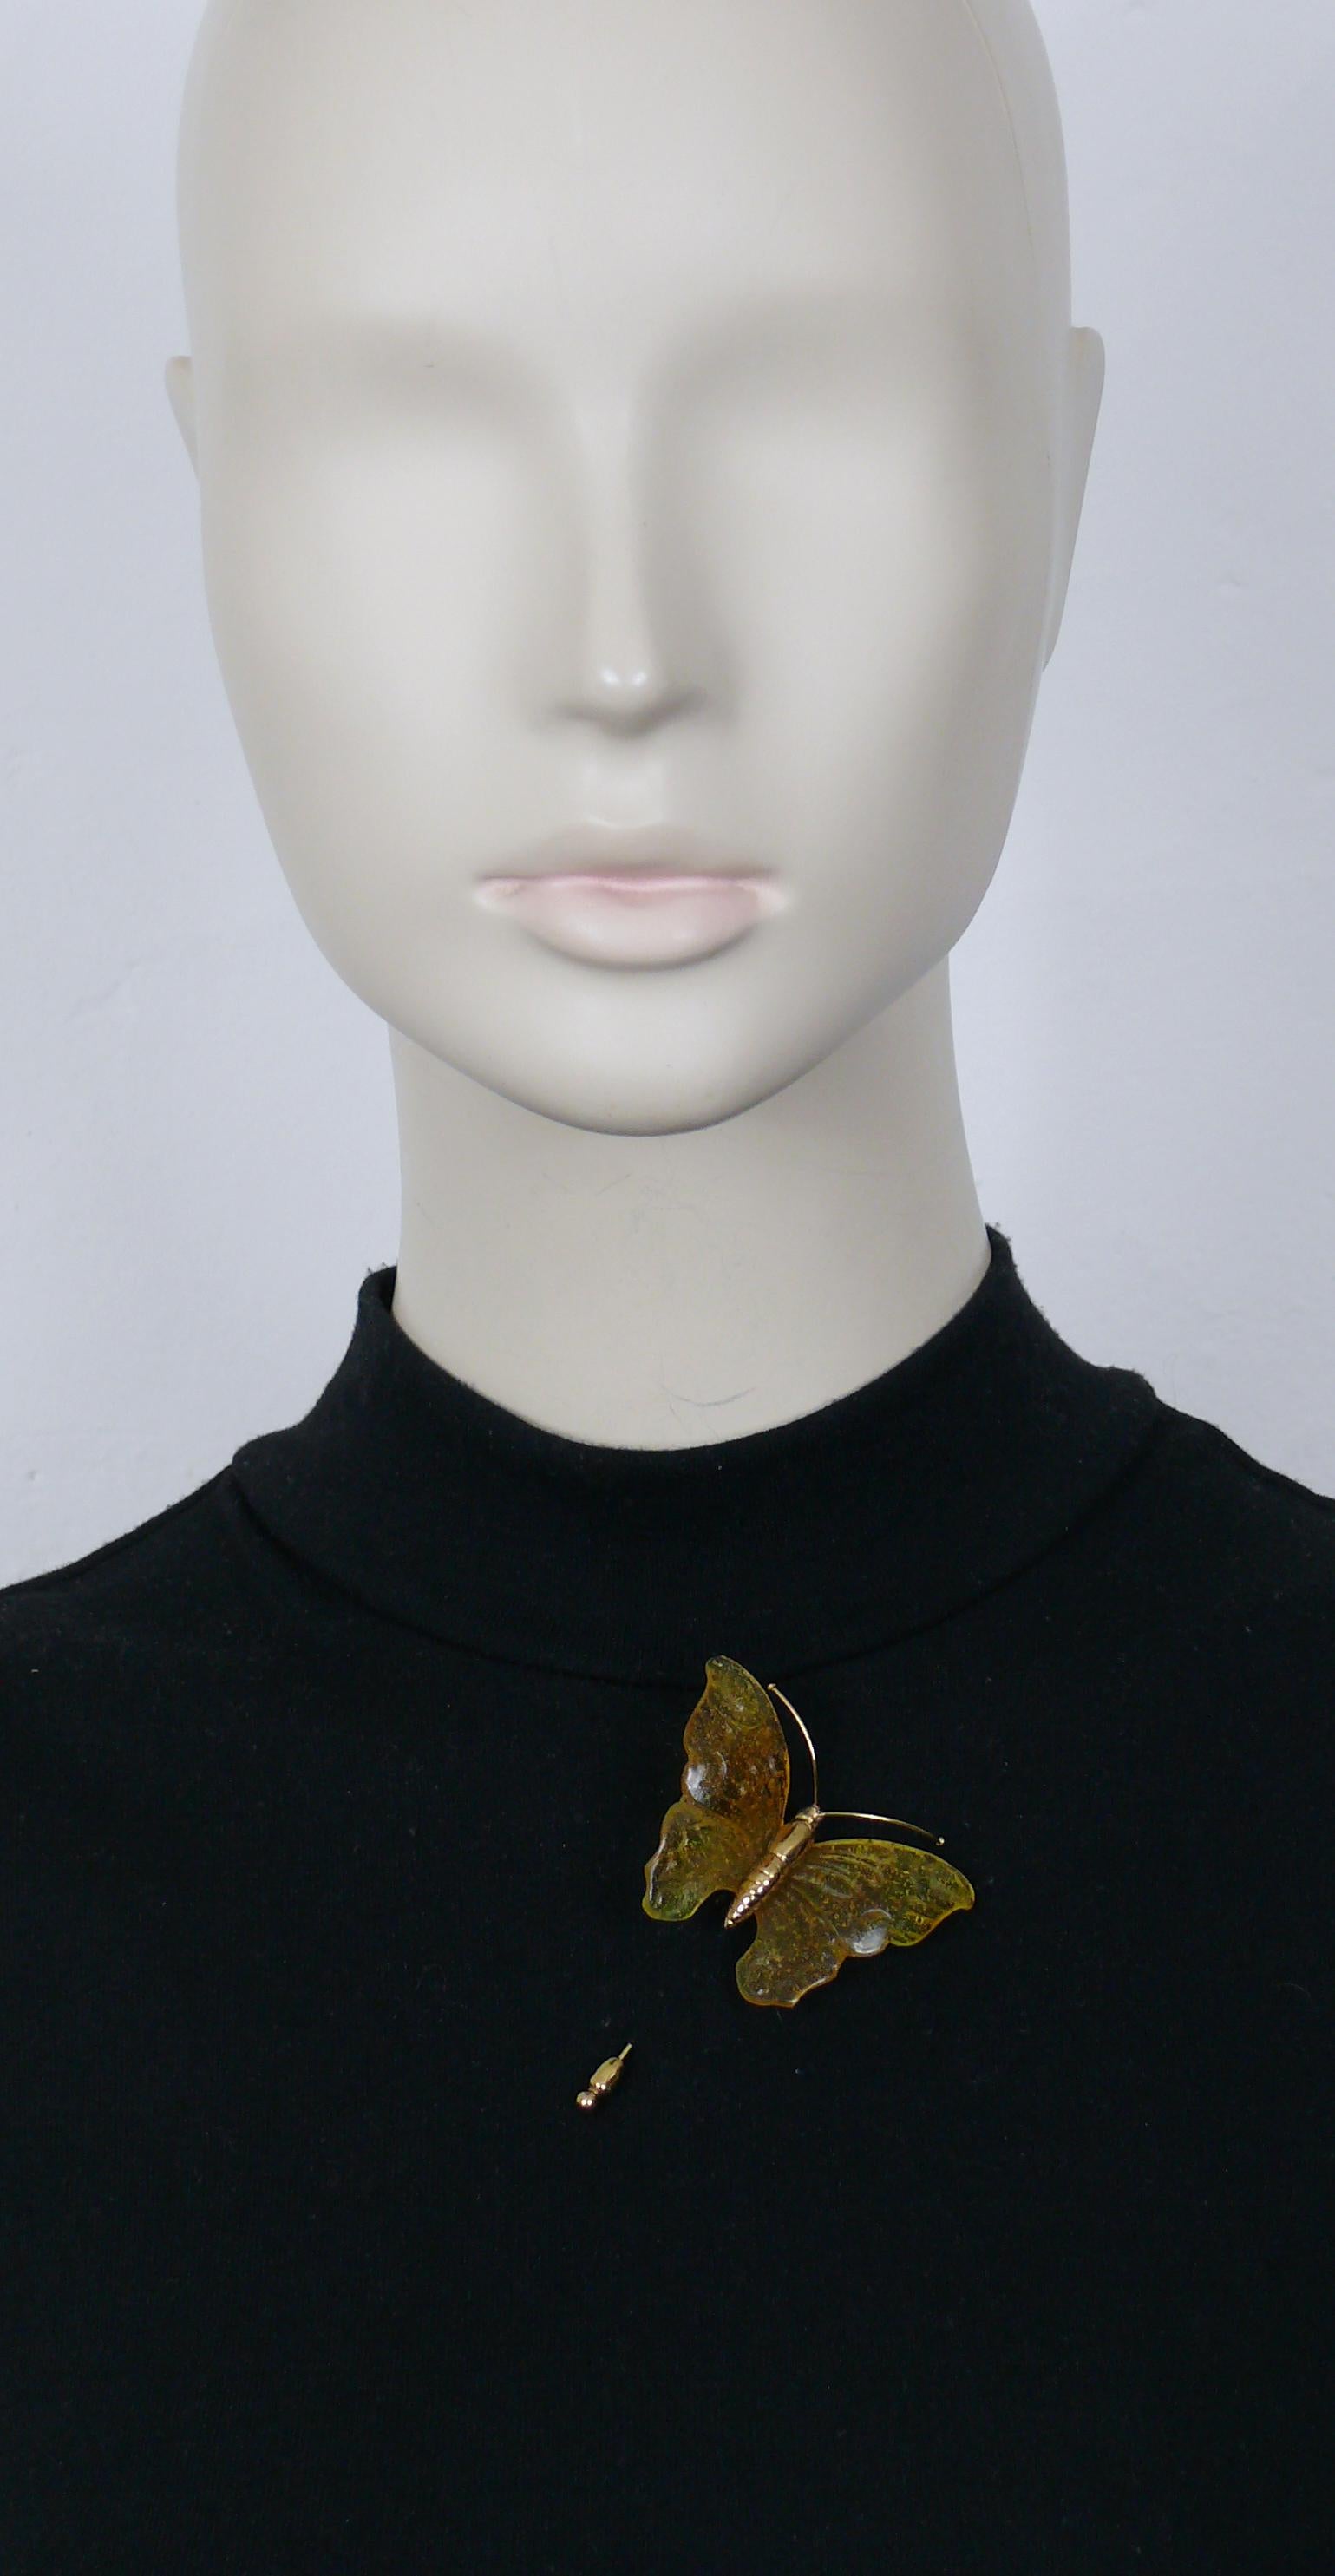 DAUM vintage lapel pin brooch featuring a yellow crystal paste butterfly.

Engraved DAUM France (see the picture n°8 - hard to photograph).

Indicative measurements : max. height approx. 6.5 cm (2.56 inches) / max. width approx. 5.5 cm (2.17